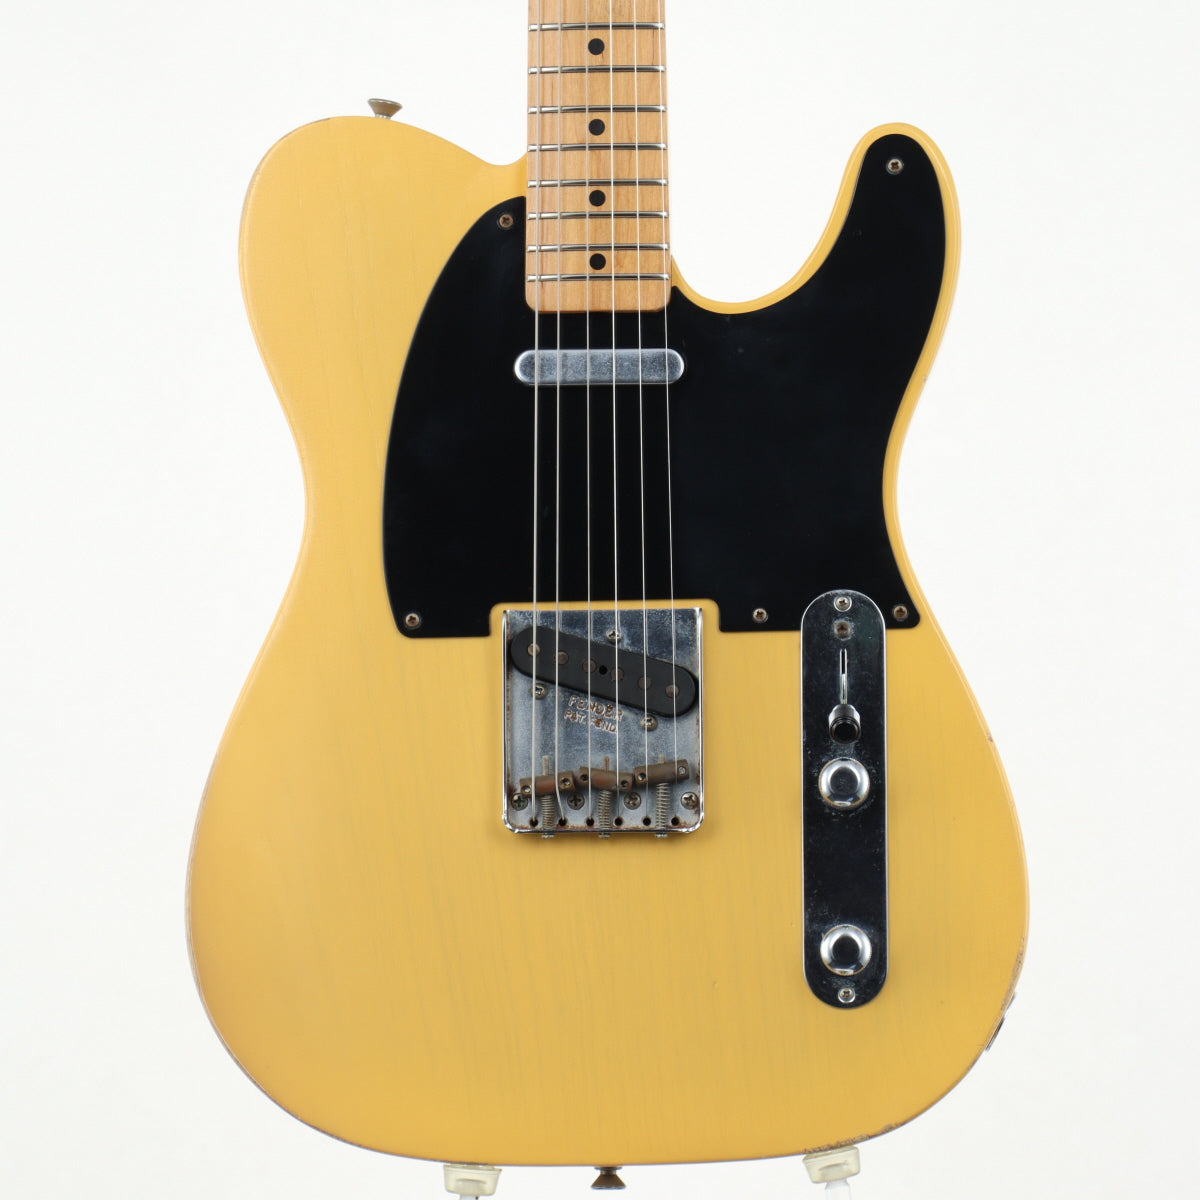 [SN MX14488141] USED Fender Mexico Fender Mexico / Road Worn 50s Telecaster Vintage Blonde [20]